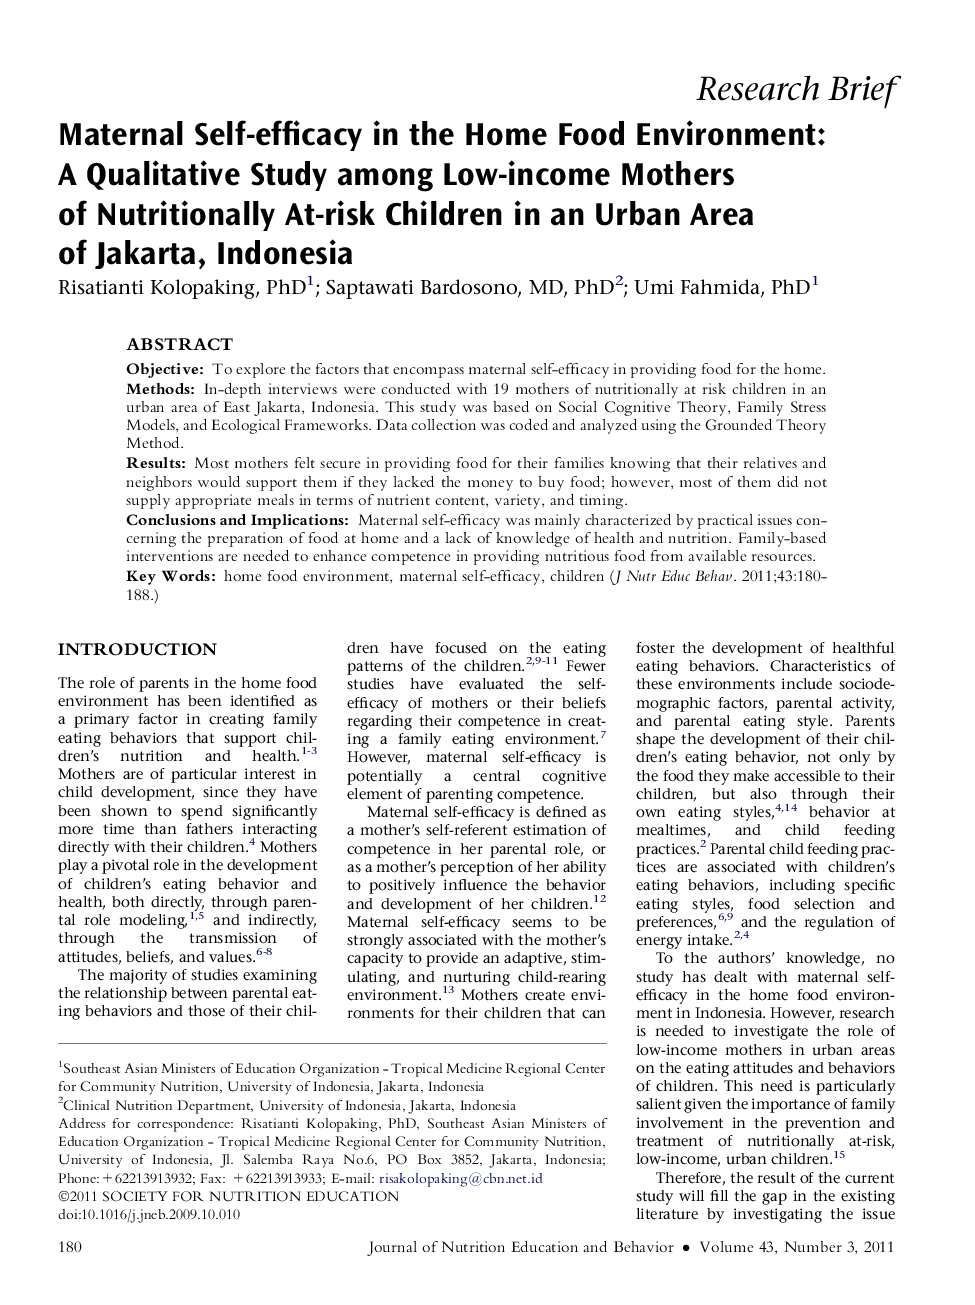 Maternal Self-efficacy in the Home Food Environment: A Qualitative Study among Low-income Mothers of Nutritionally At-risk Children in an Urban Area of Jakarta, Indonesia